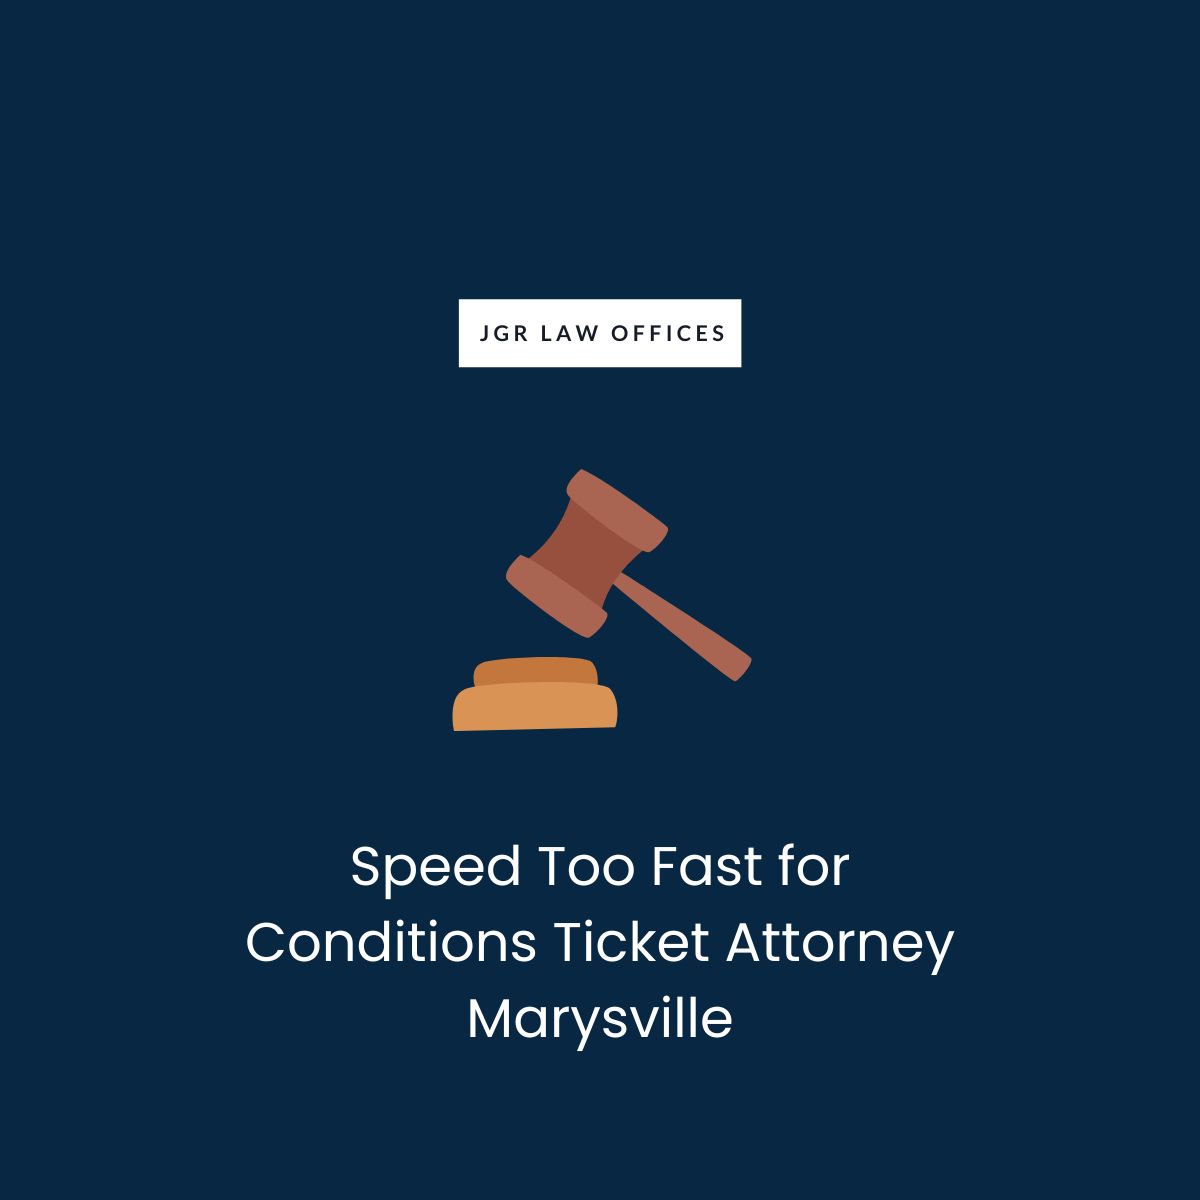 Speed Too Fast for Conditions Ticket Attorney Marysville